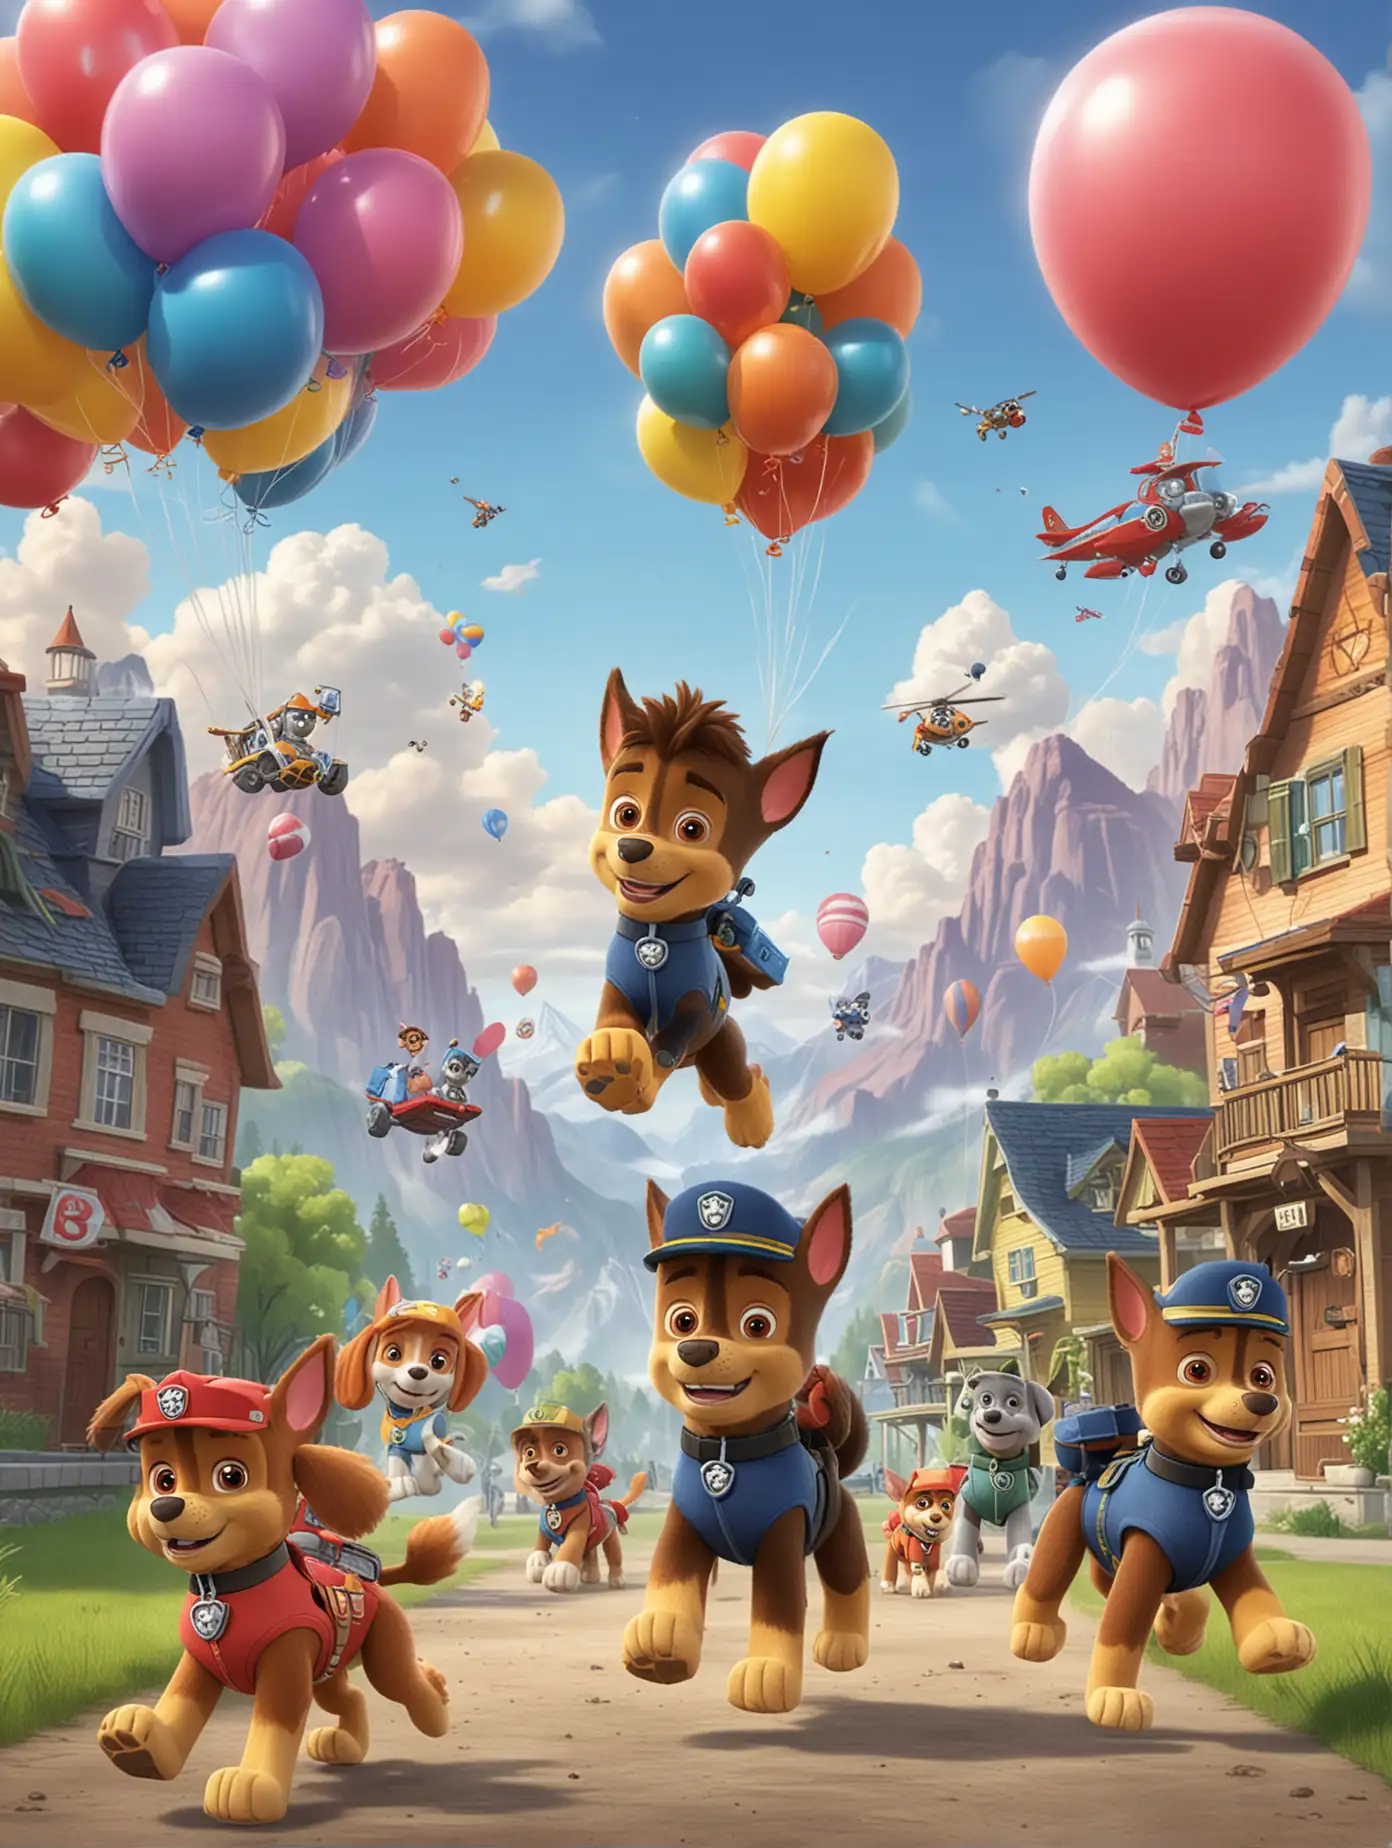 Create an image that depicts a scene from paw patrol without the characters add balloons 